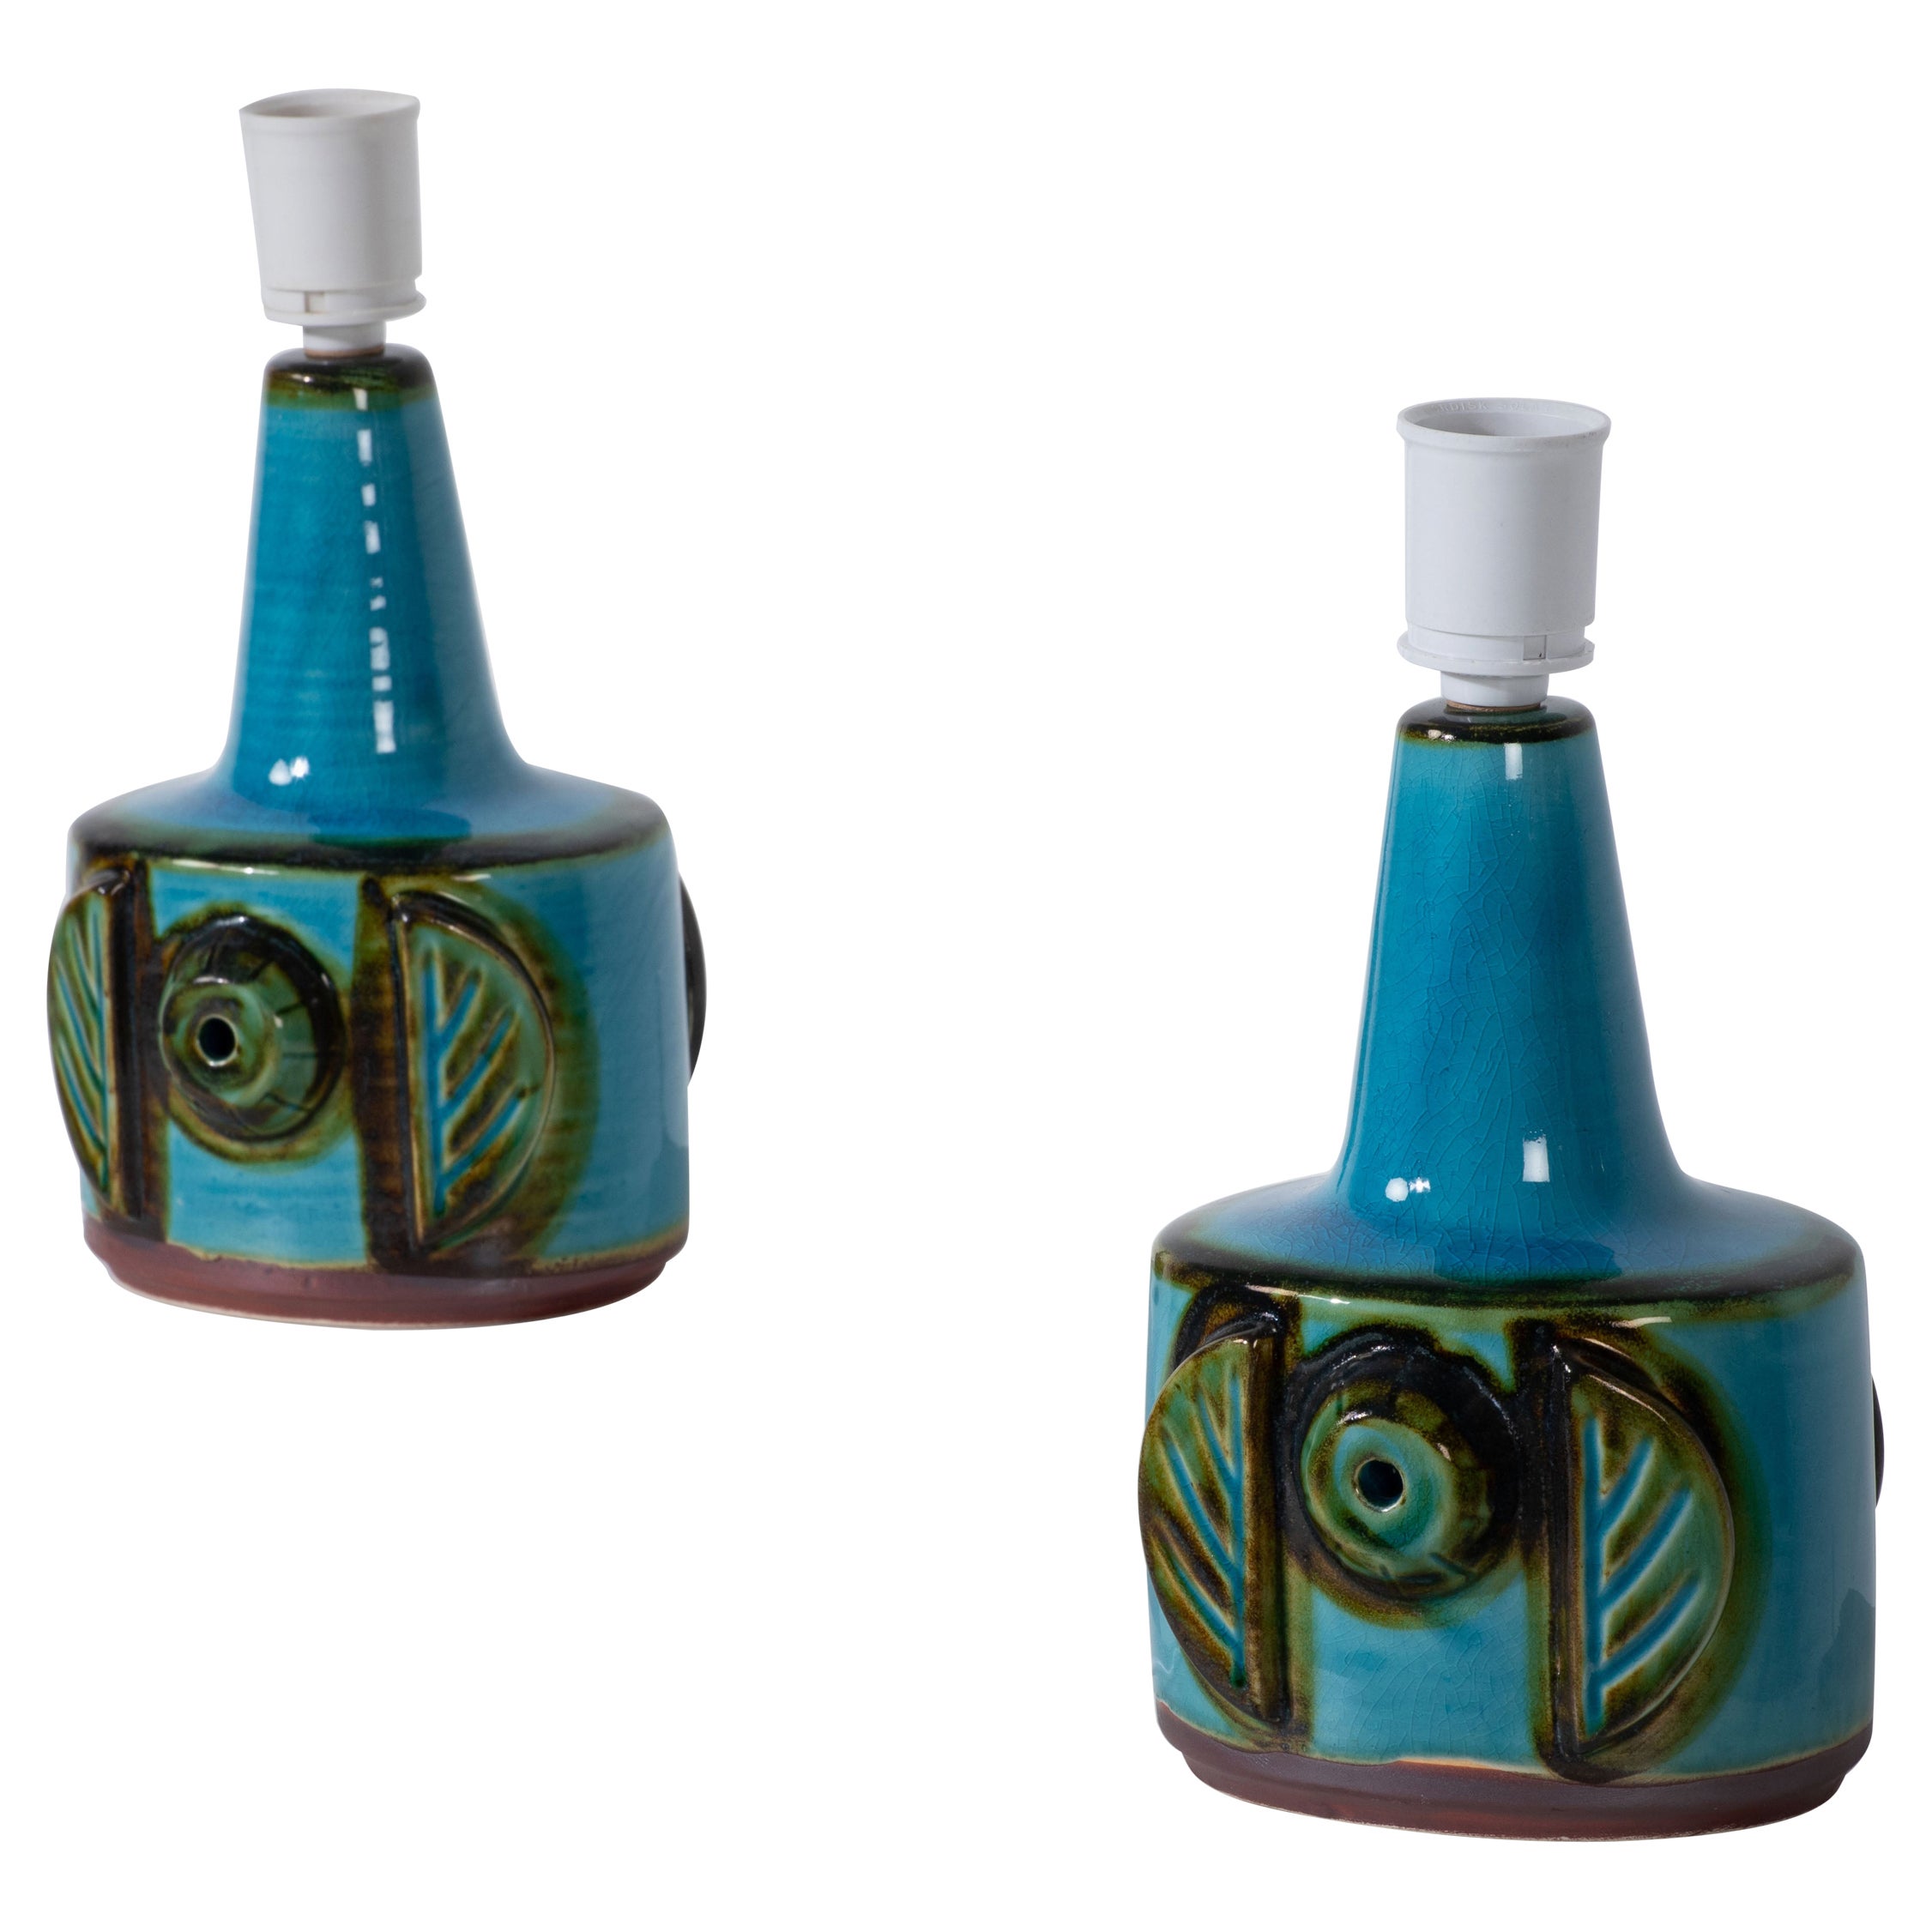 Pair of Turquoise Søholm Table Lamps by Einar Johansen, Denmark, 1960s For Sale